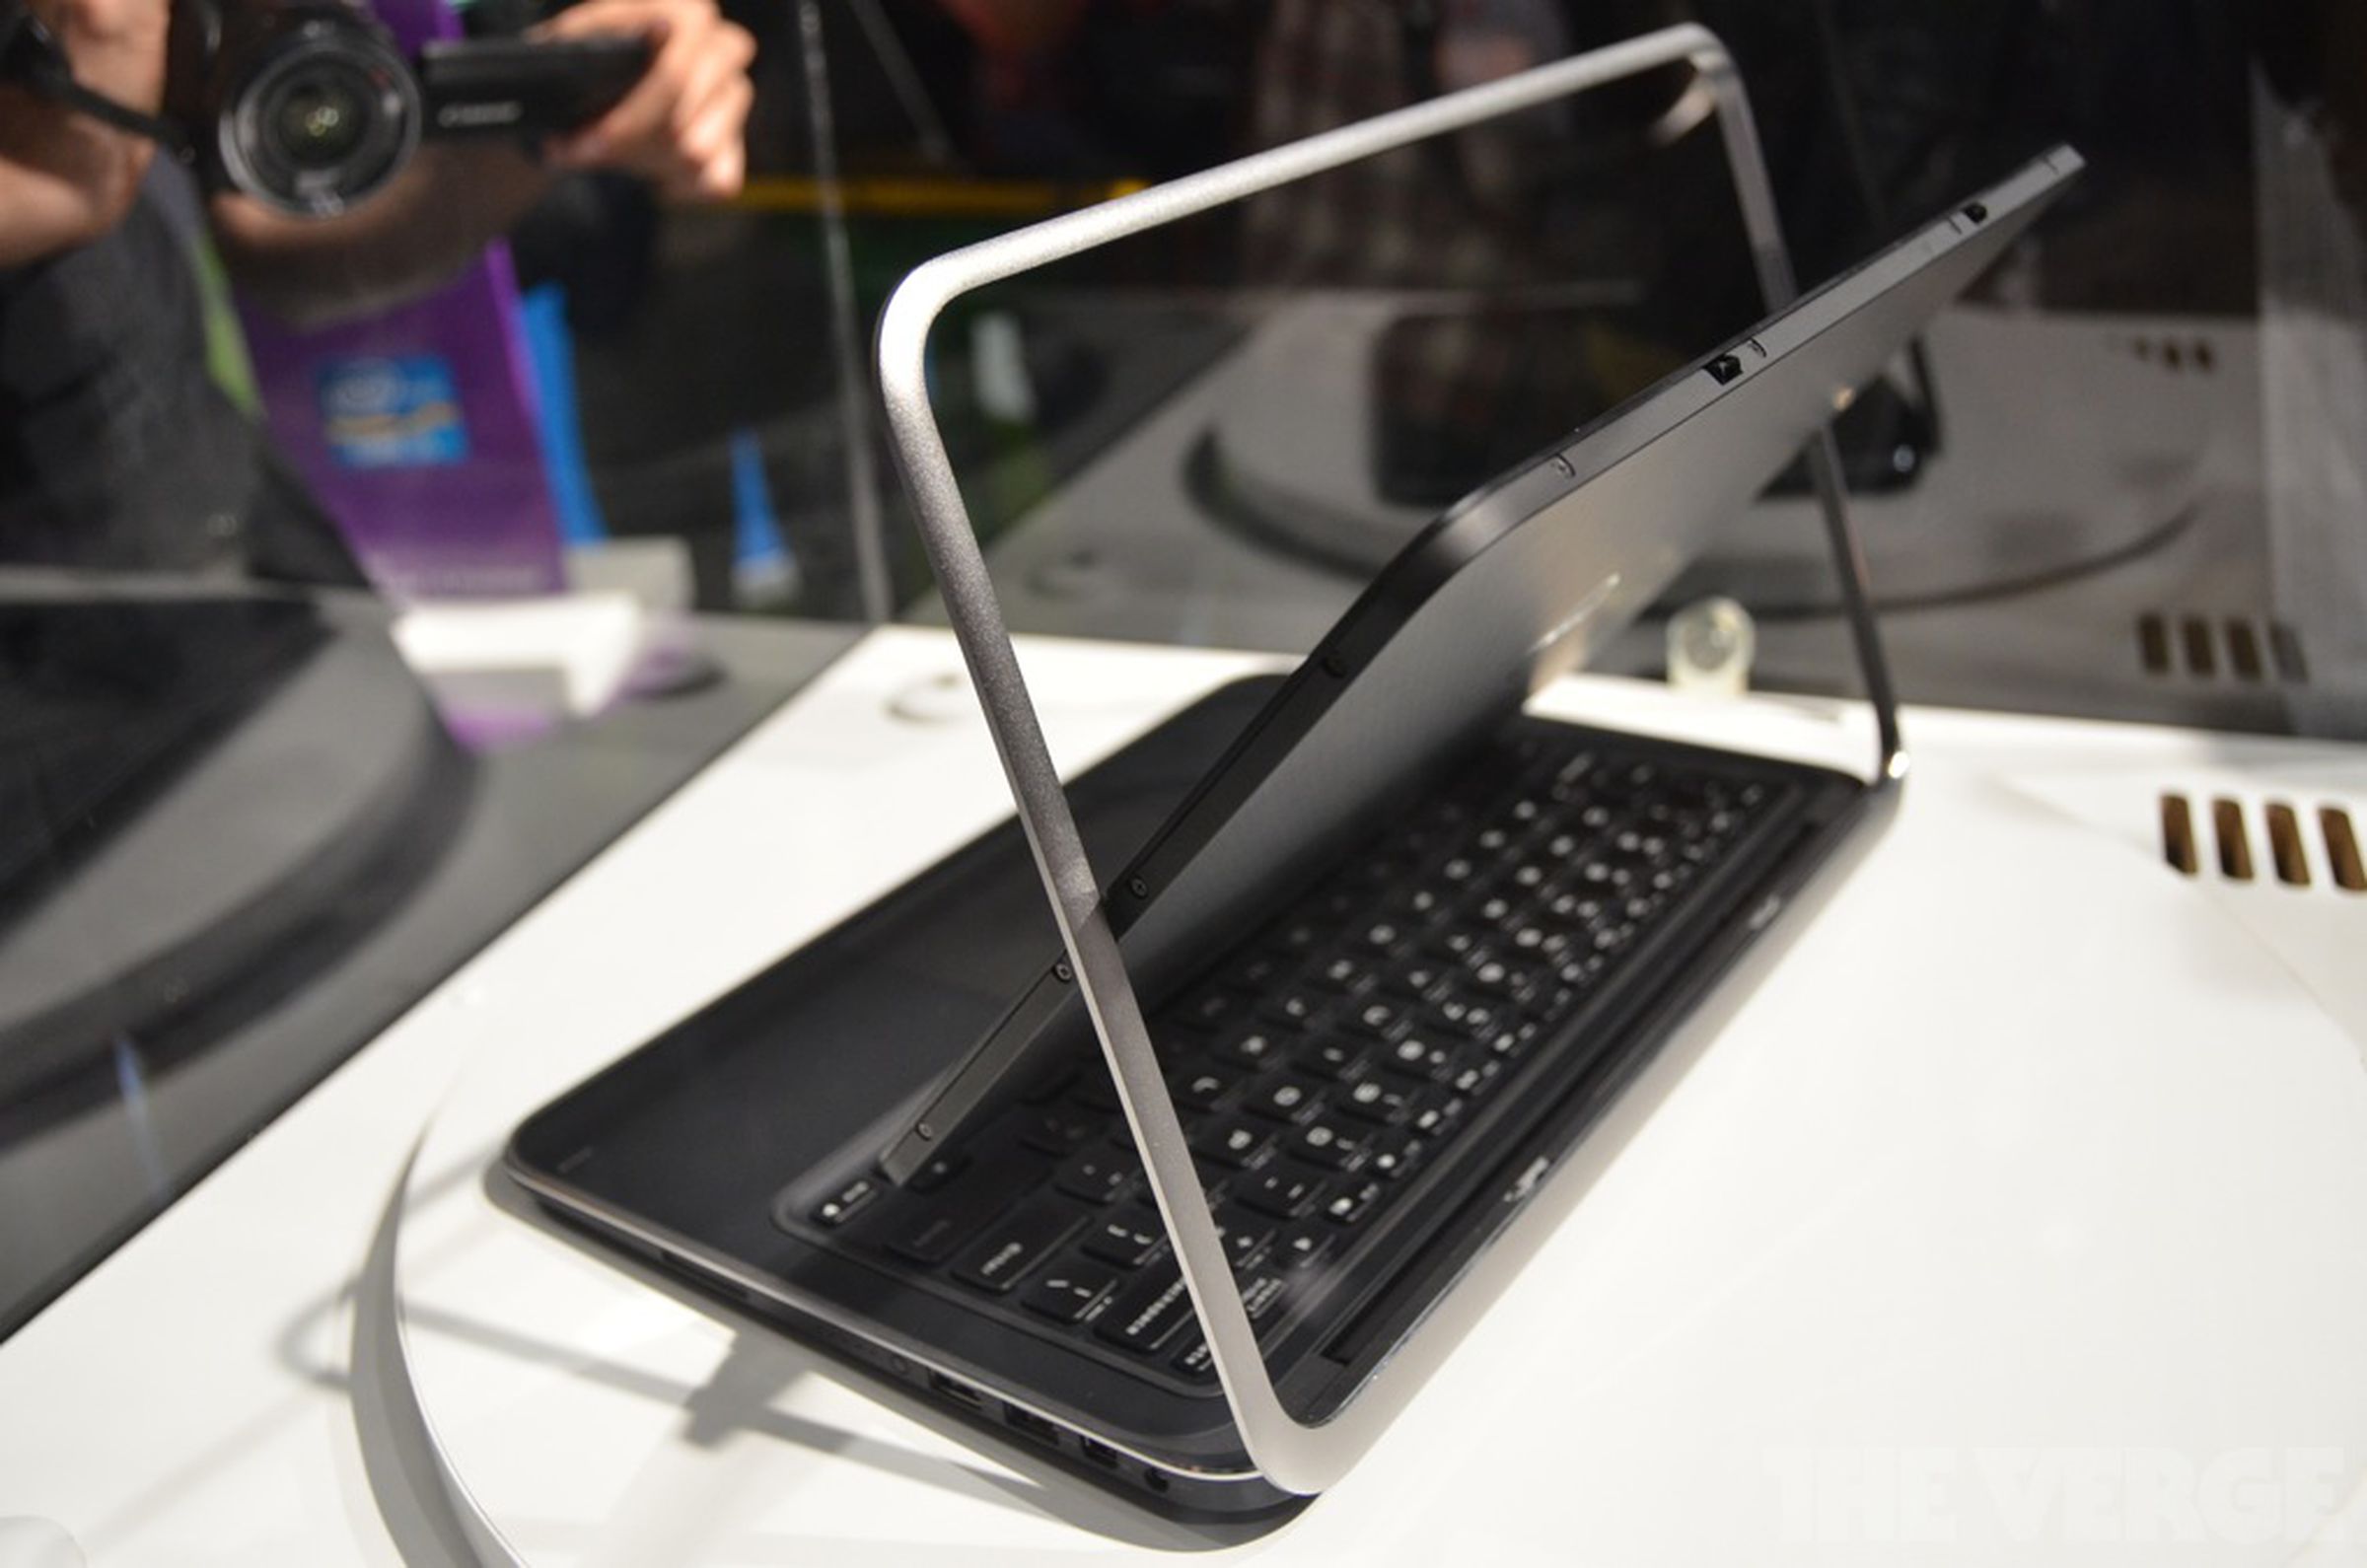 Dell XPS Duo 12 hands-on photos